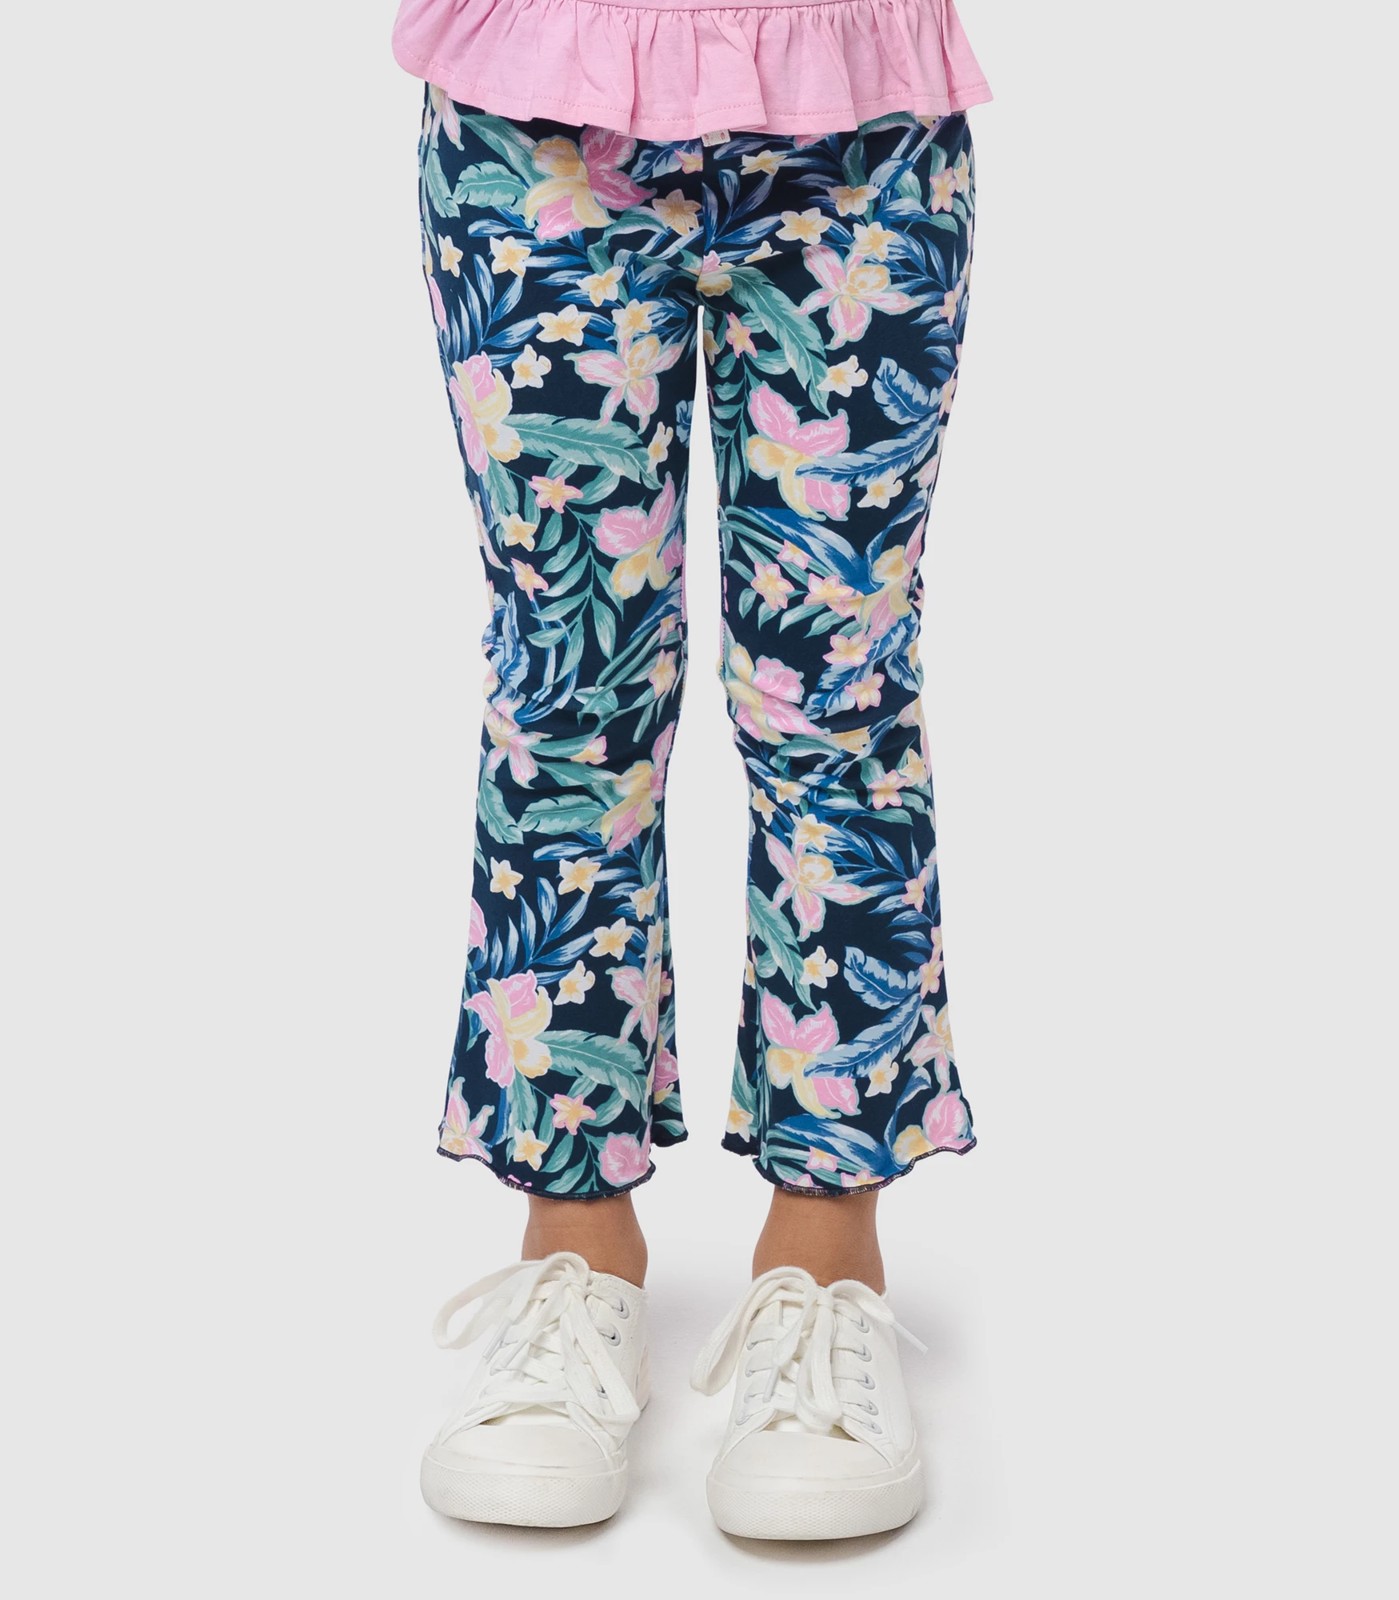 Piping Hot Floral Flare Leggings